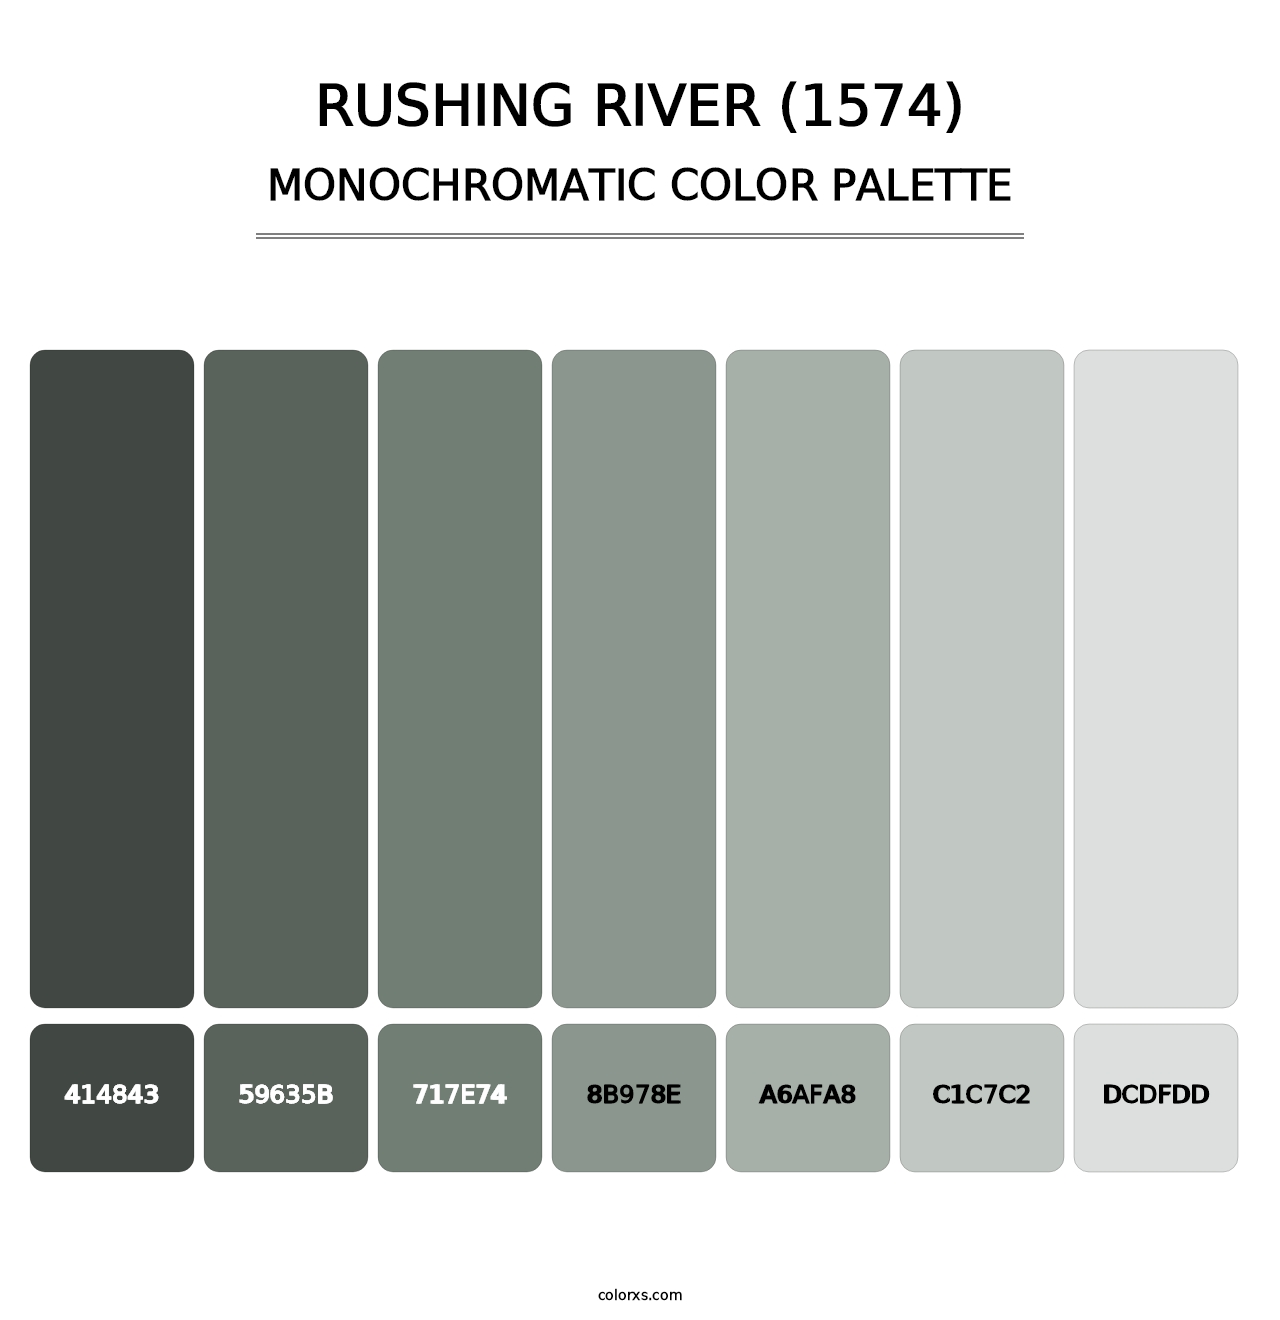 Rushing River (1574) - Monochromatic Color Palette